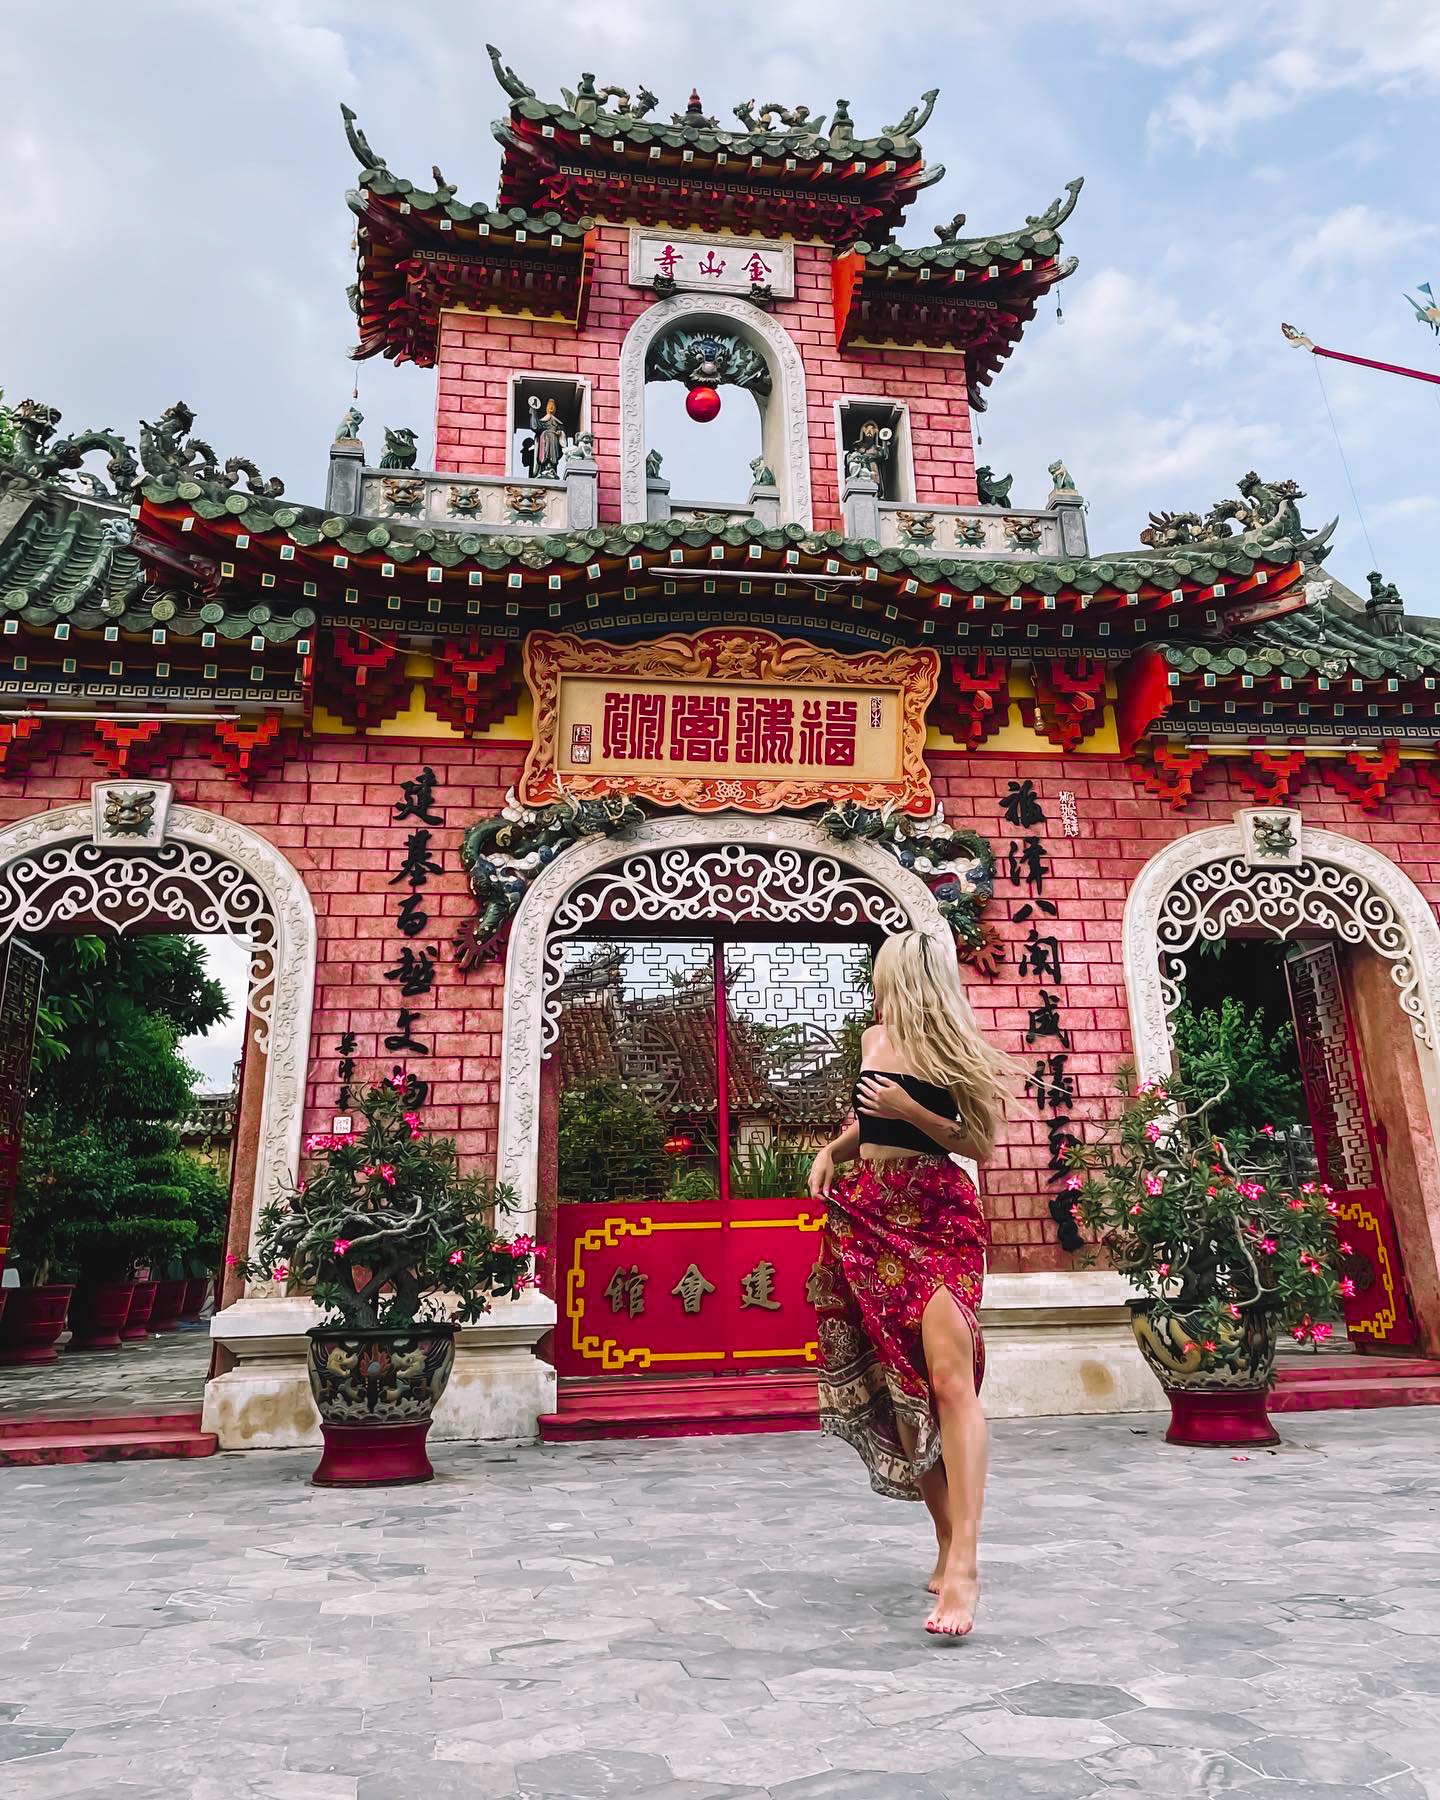 How Many Days should you spend in Hoi An?